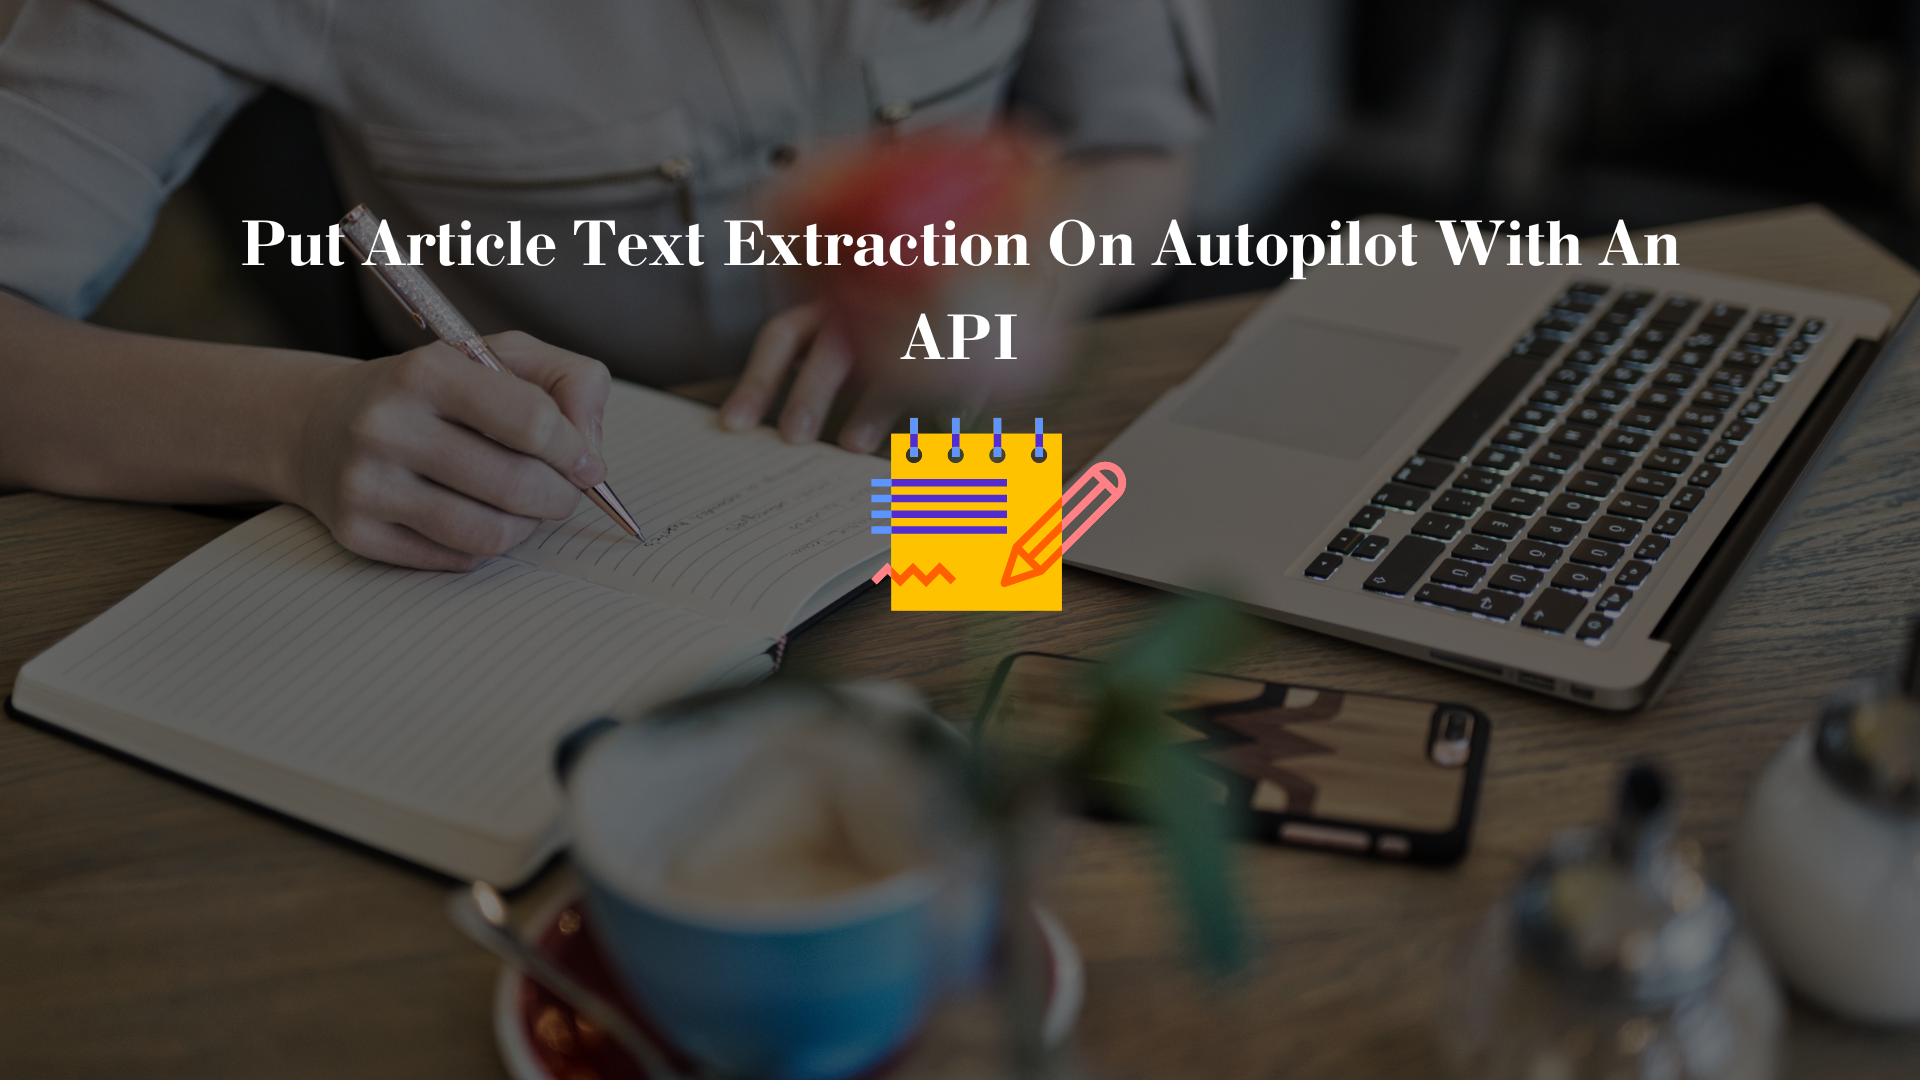 Put Article Text Extraction On Autopilot With An API